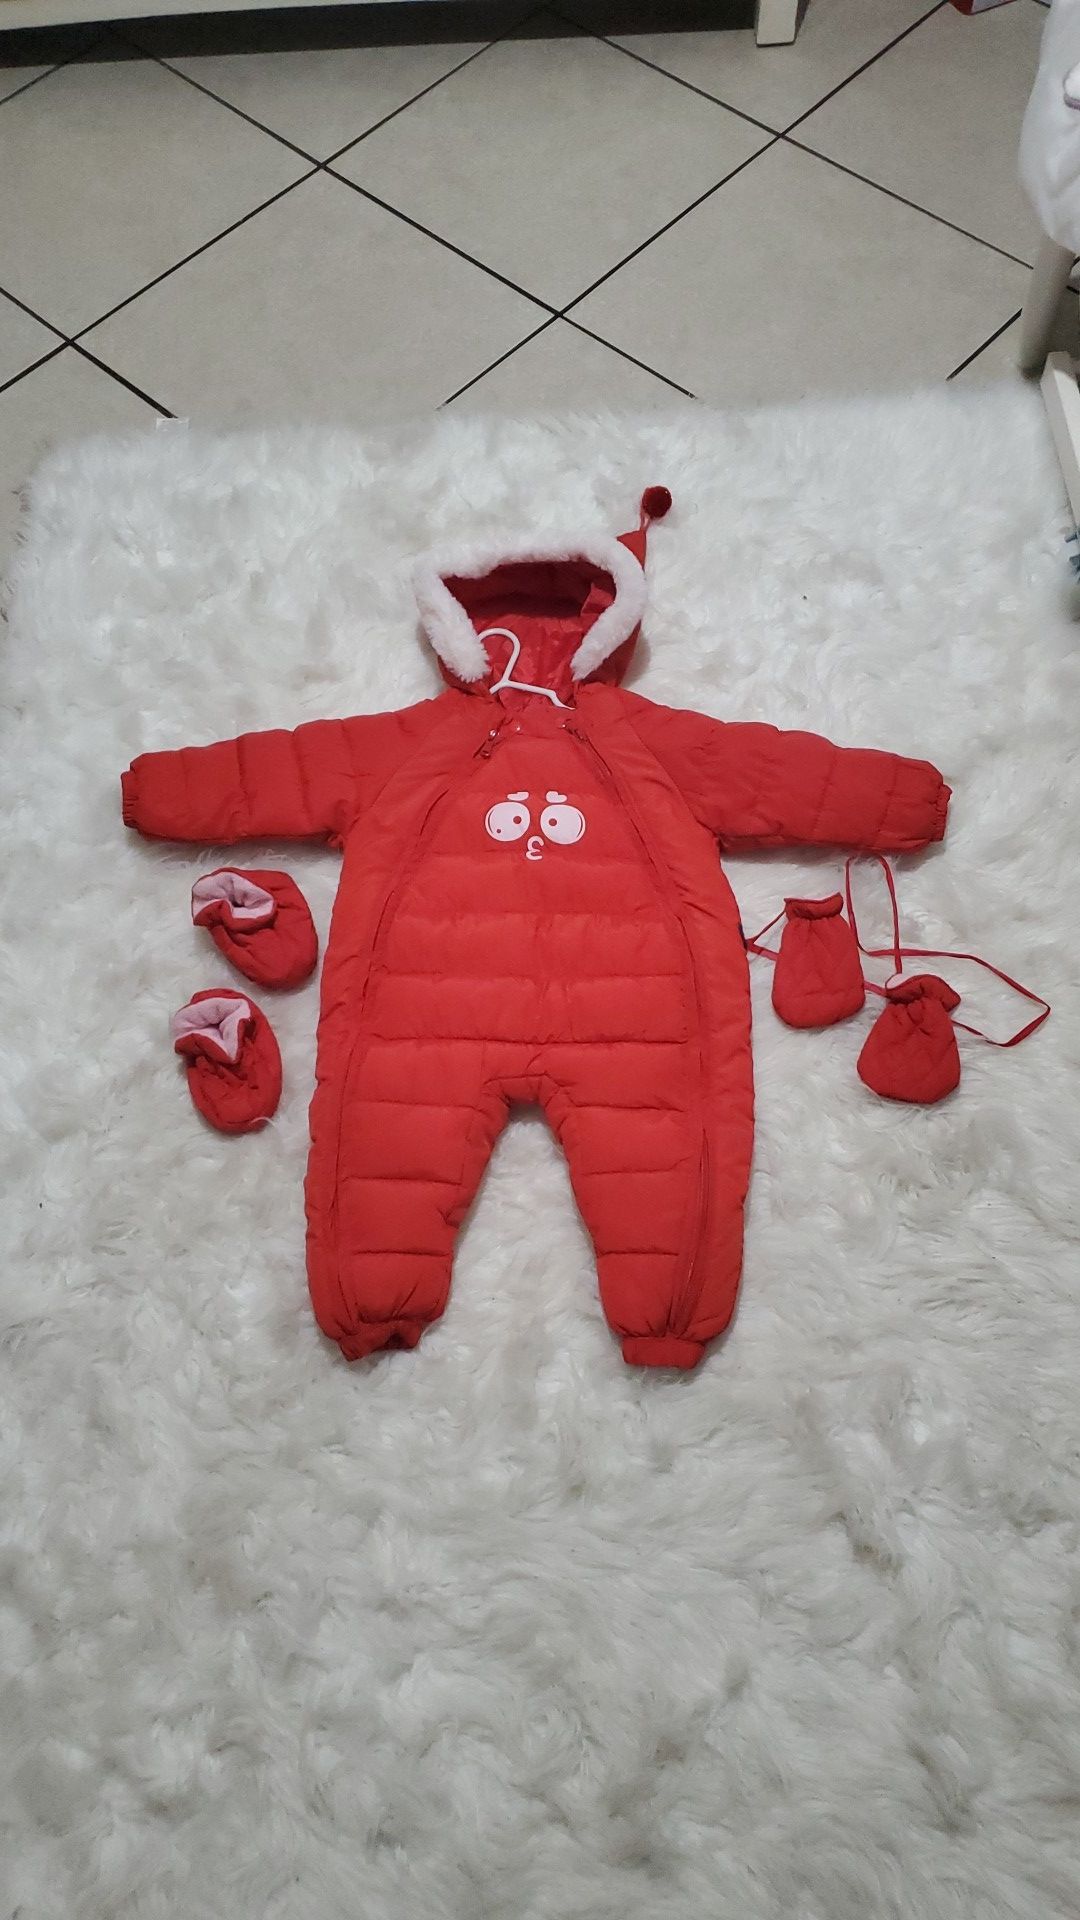 Baby boy/girl snow suit size 6/12 months.